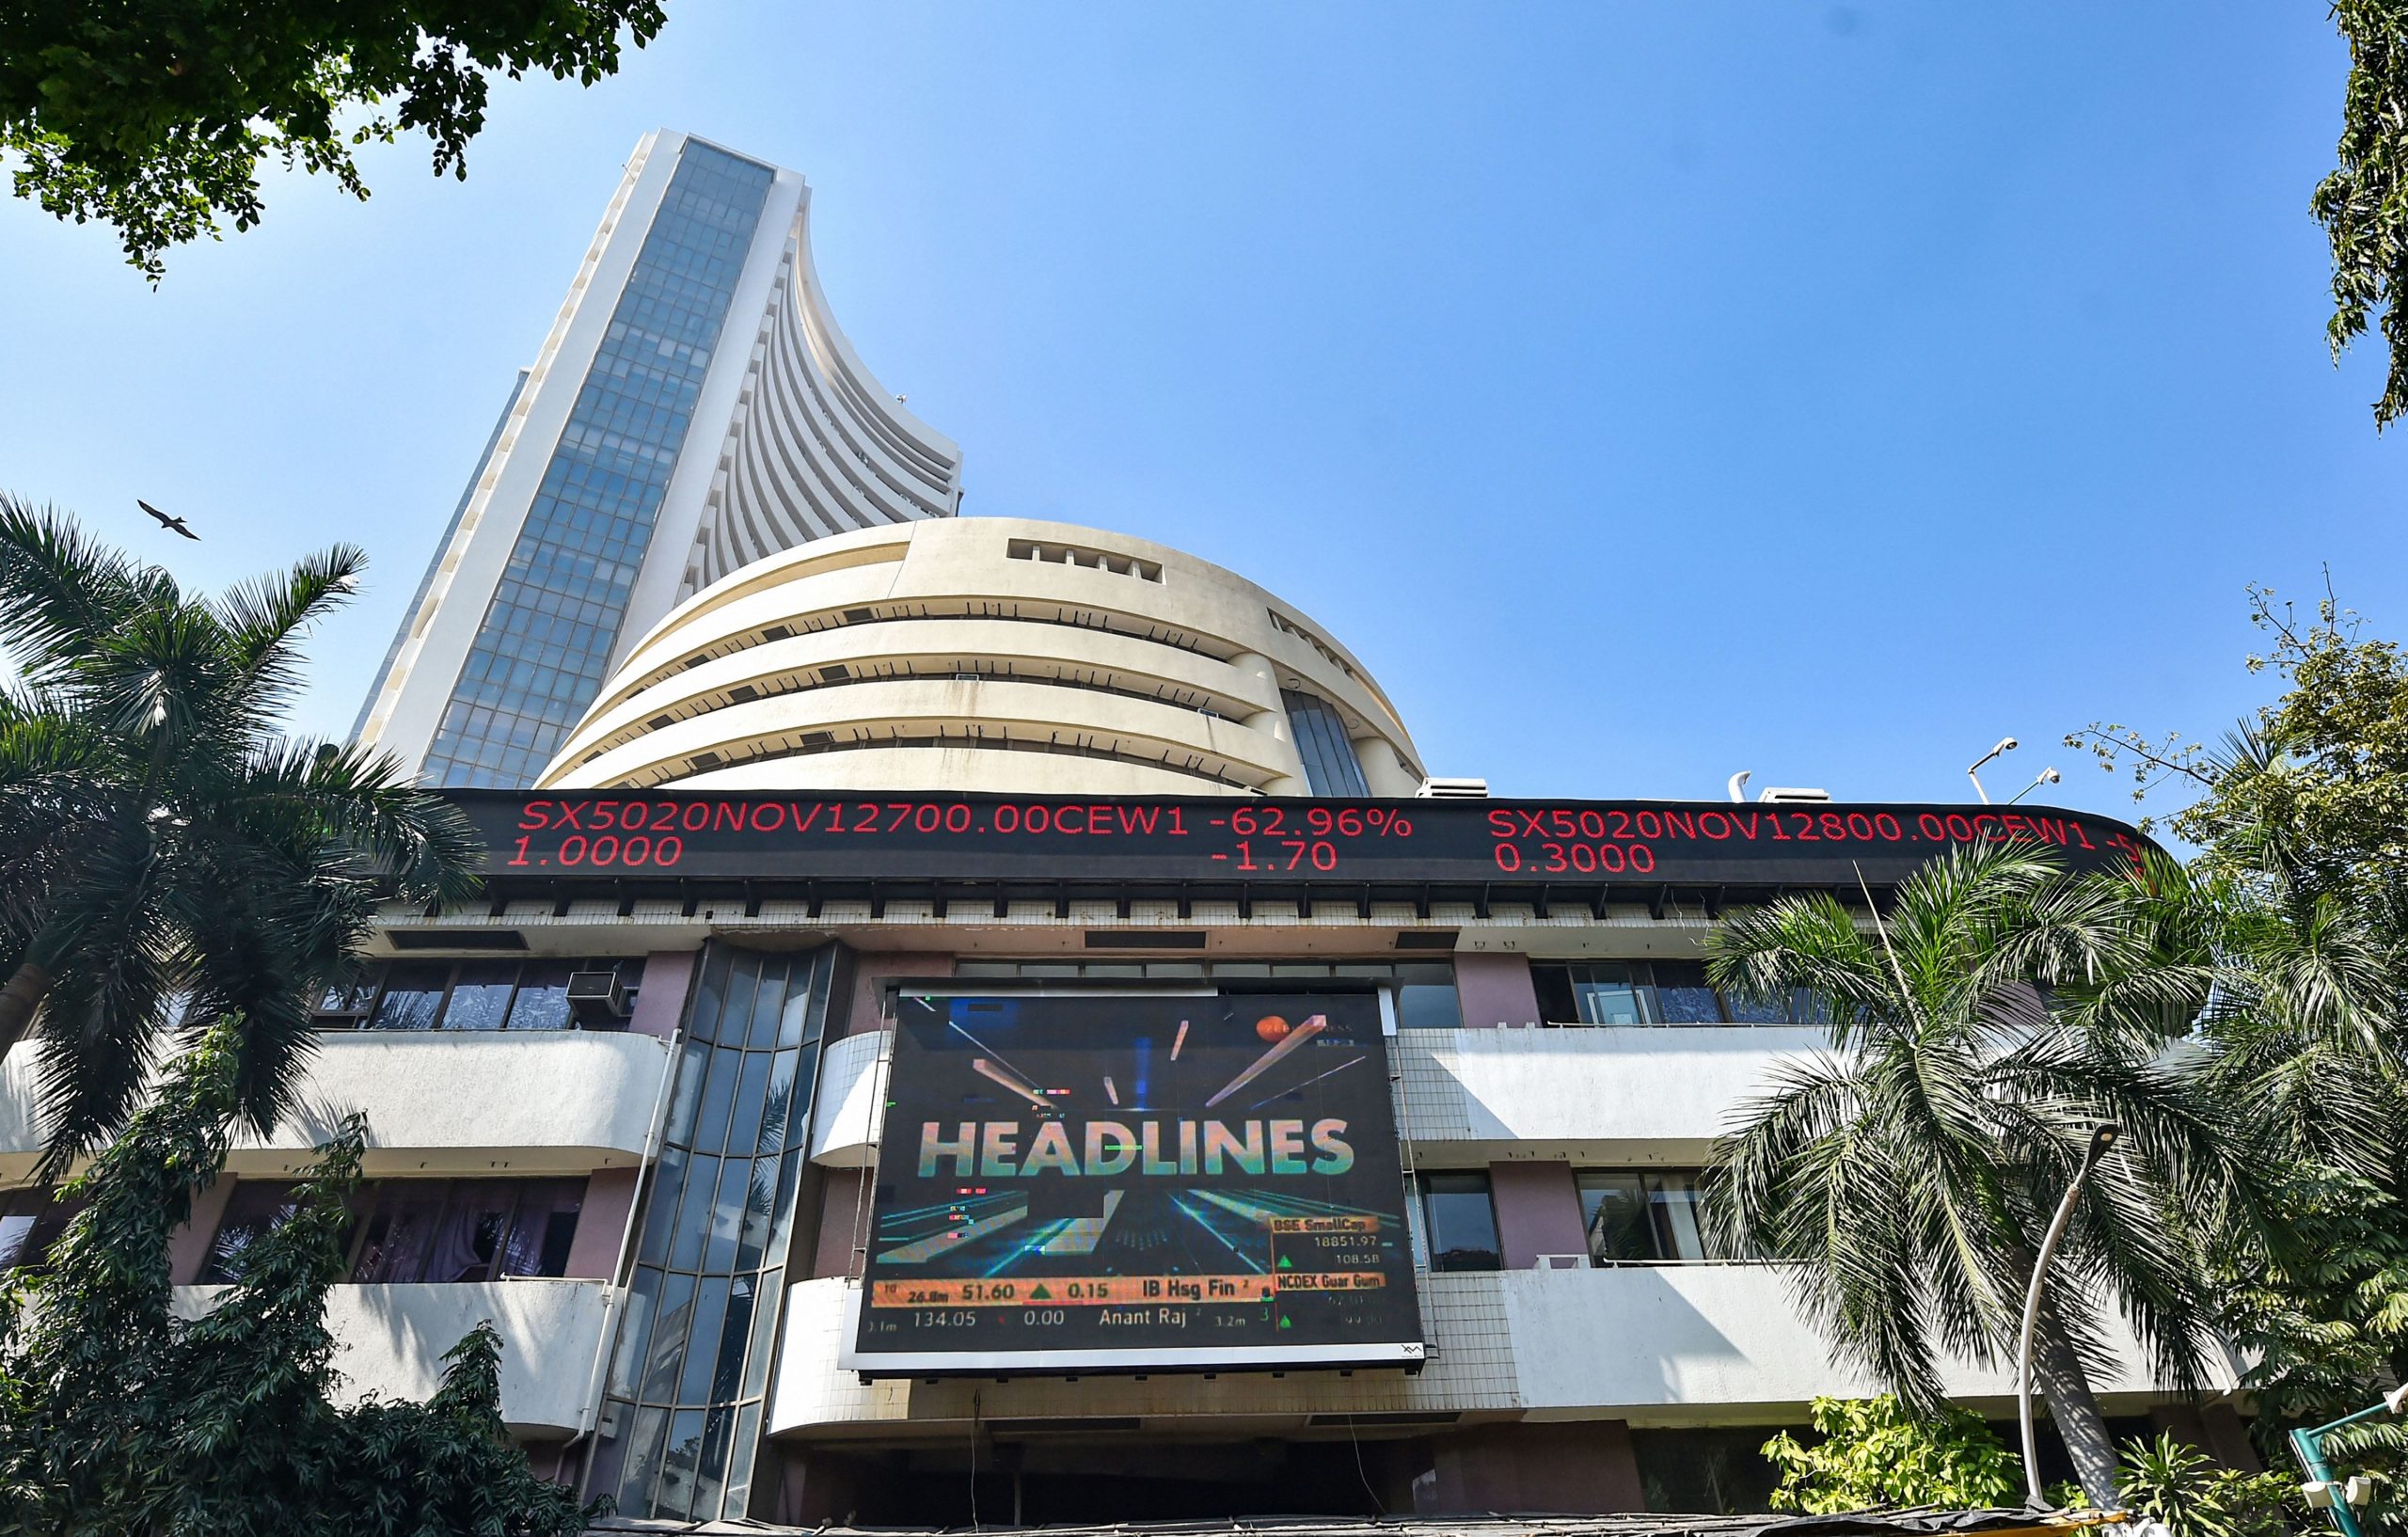 Trending Stocks: Biocon, JSW Steel, Infosys and others in news today